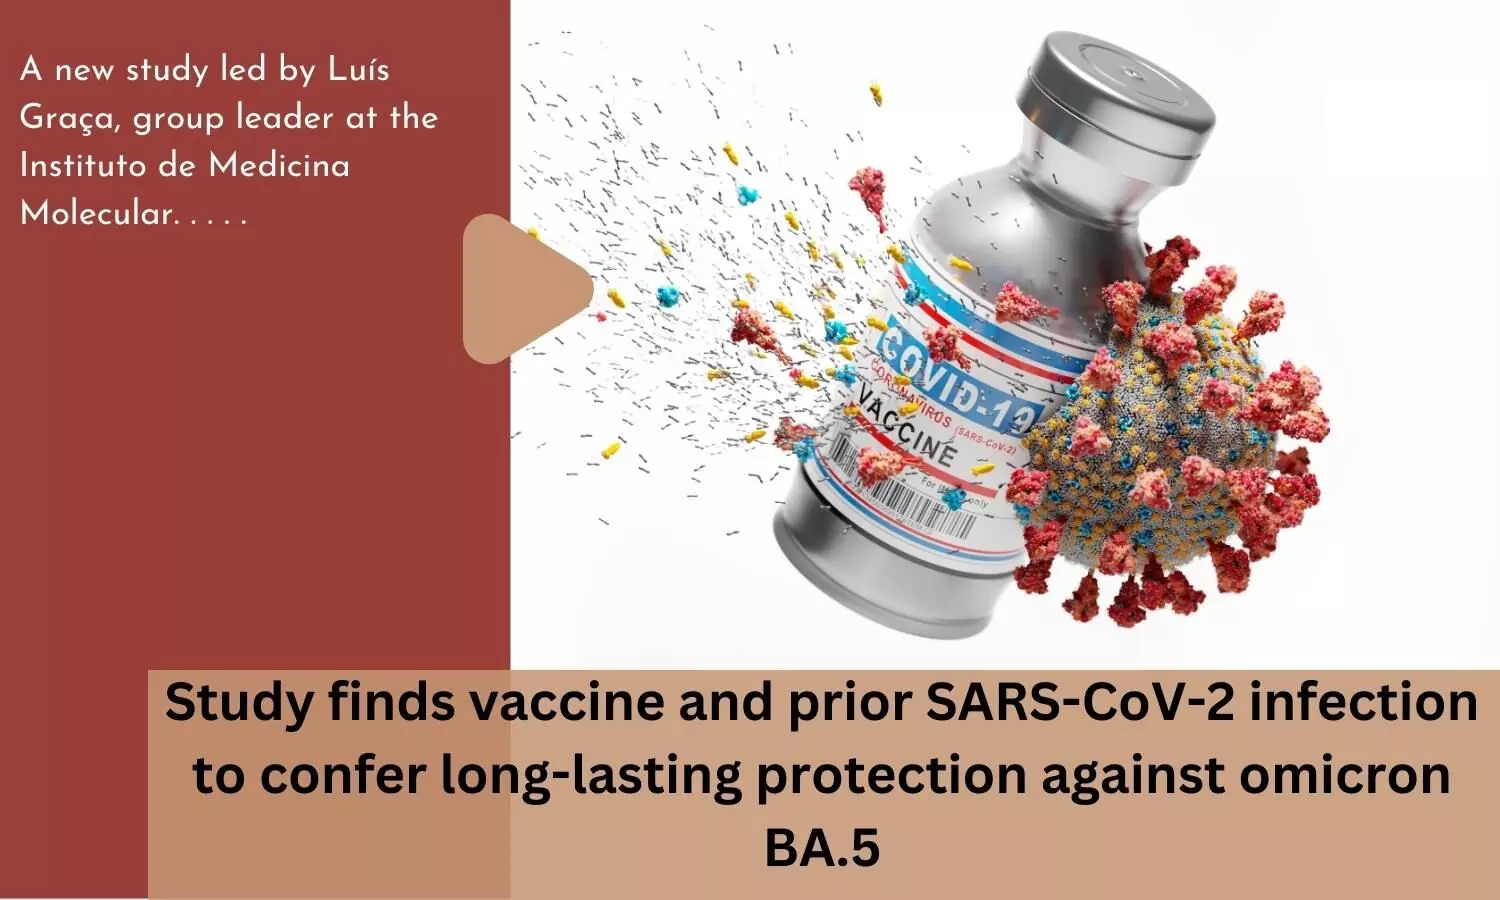 Study finds vaccine and prior SARS-CoV-2 infection to confer long-lasting protection against omicron BA.5